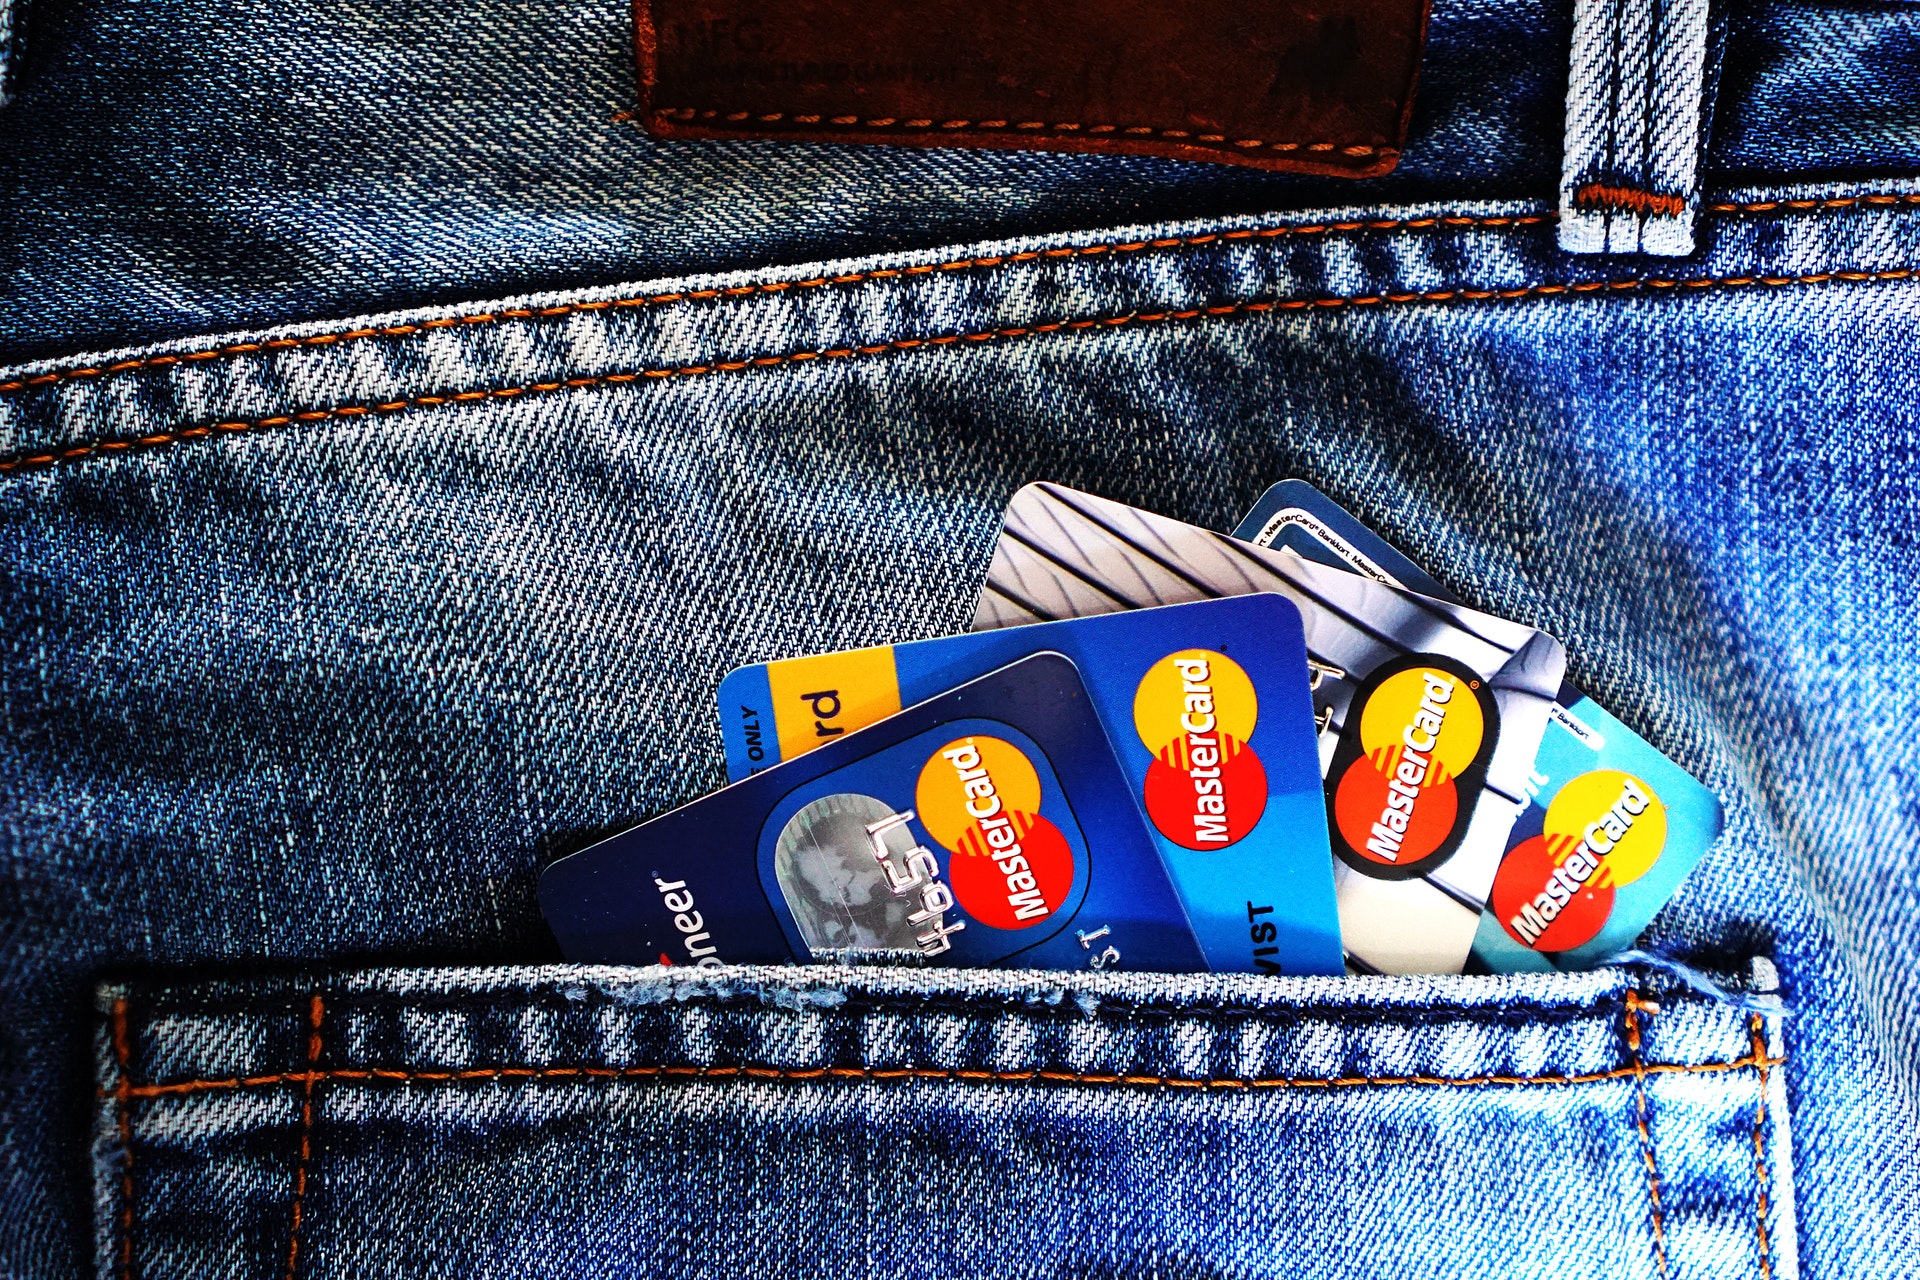 Secured Credit Cards are an excellent way to build or rebuild your credit score